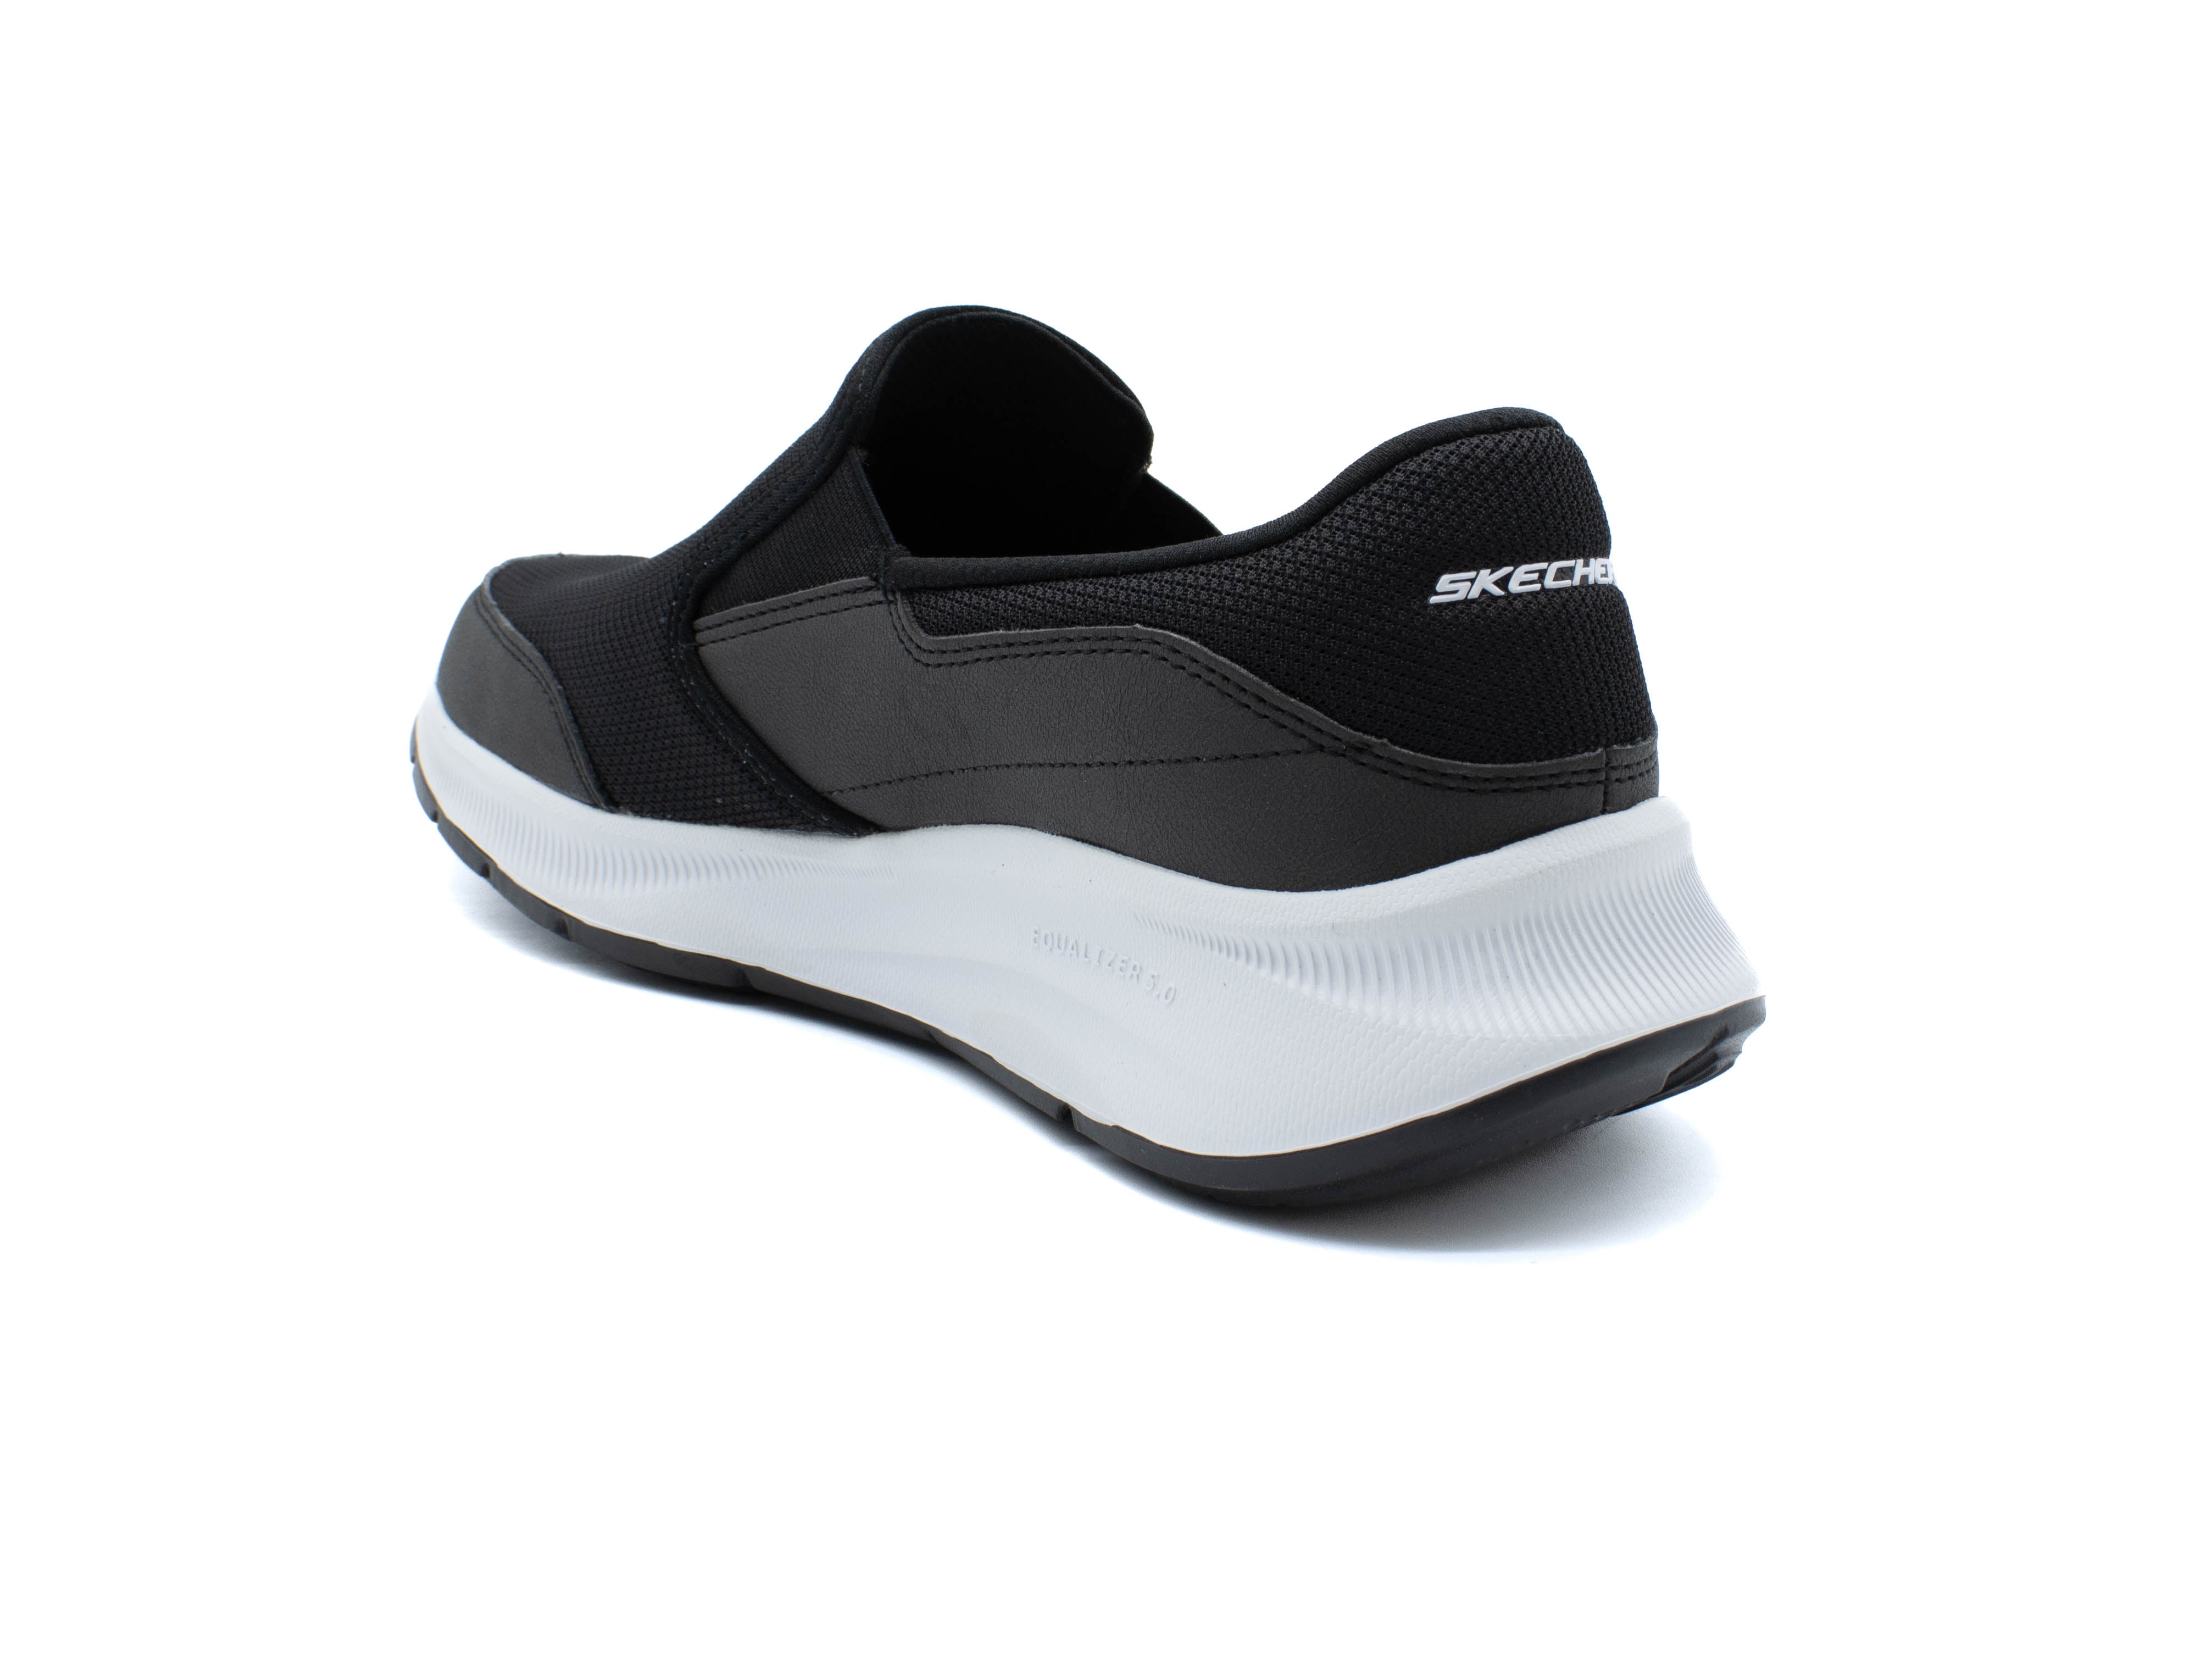 SKECHERS Relaxed Fit®: Equalizer 5.0 - Persistable